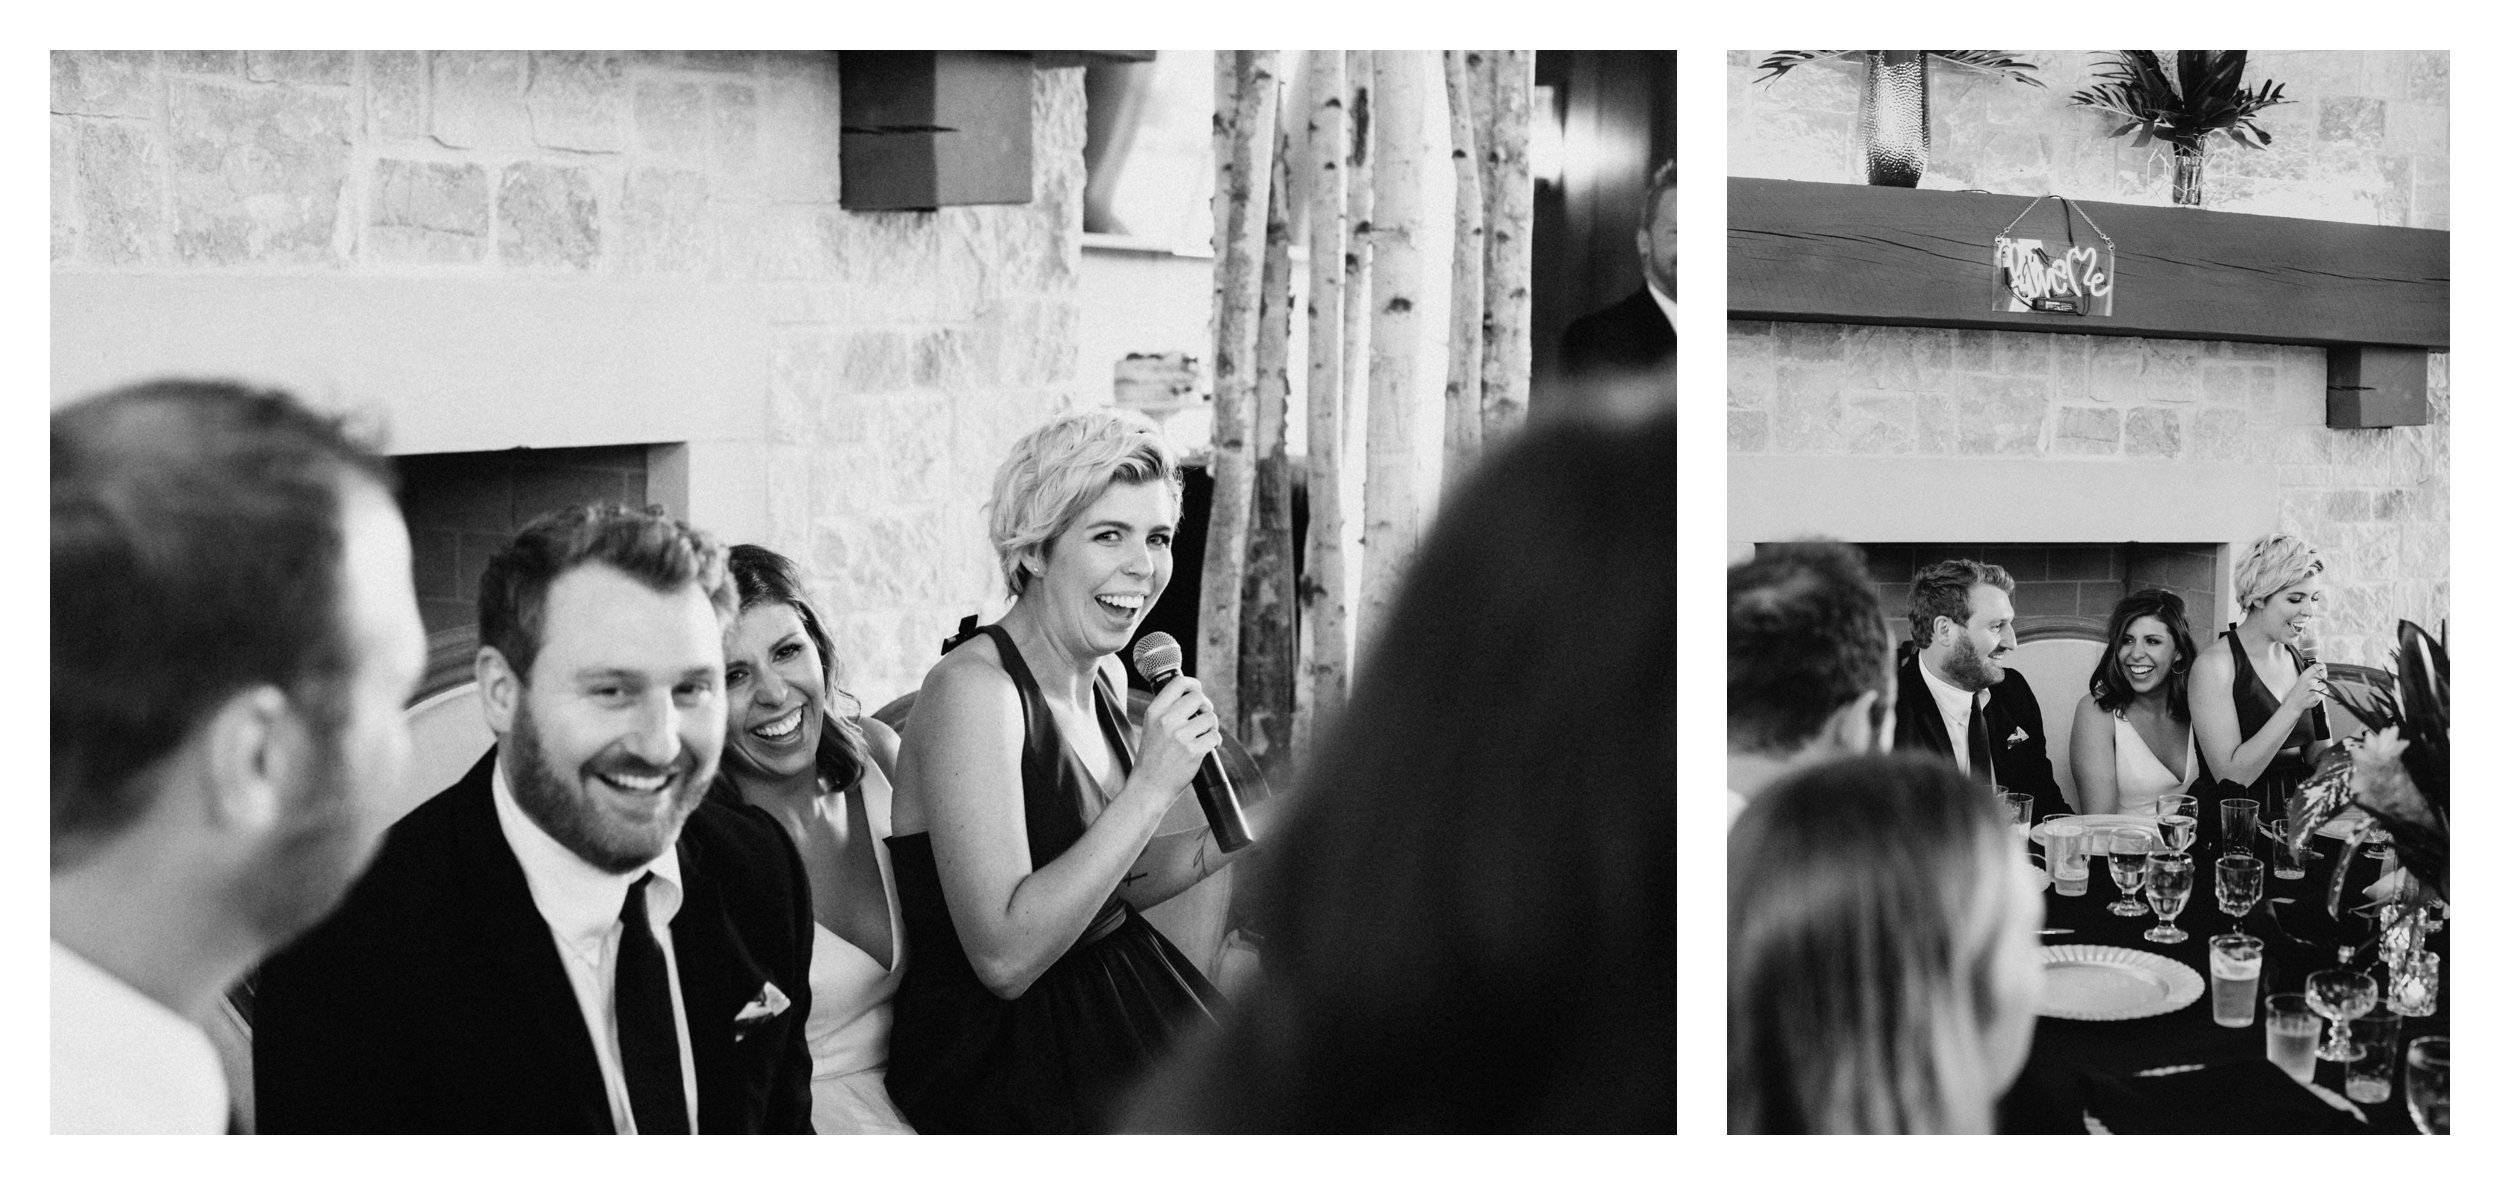 Bridesmaid giving speech while bride and groom laugh at 7 vines vineyard wedding reception